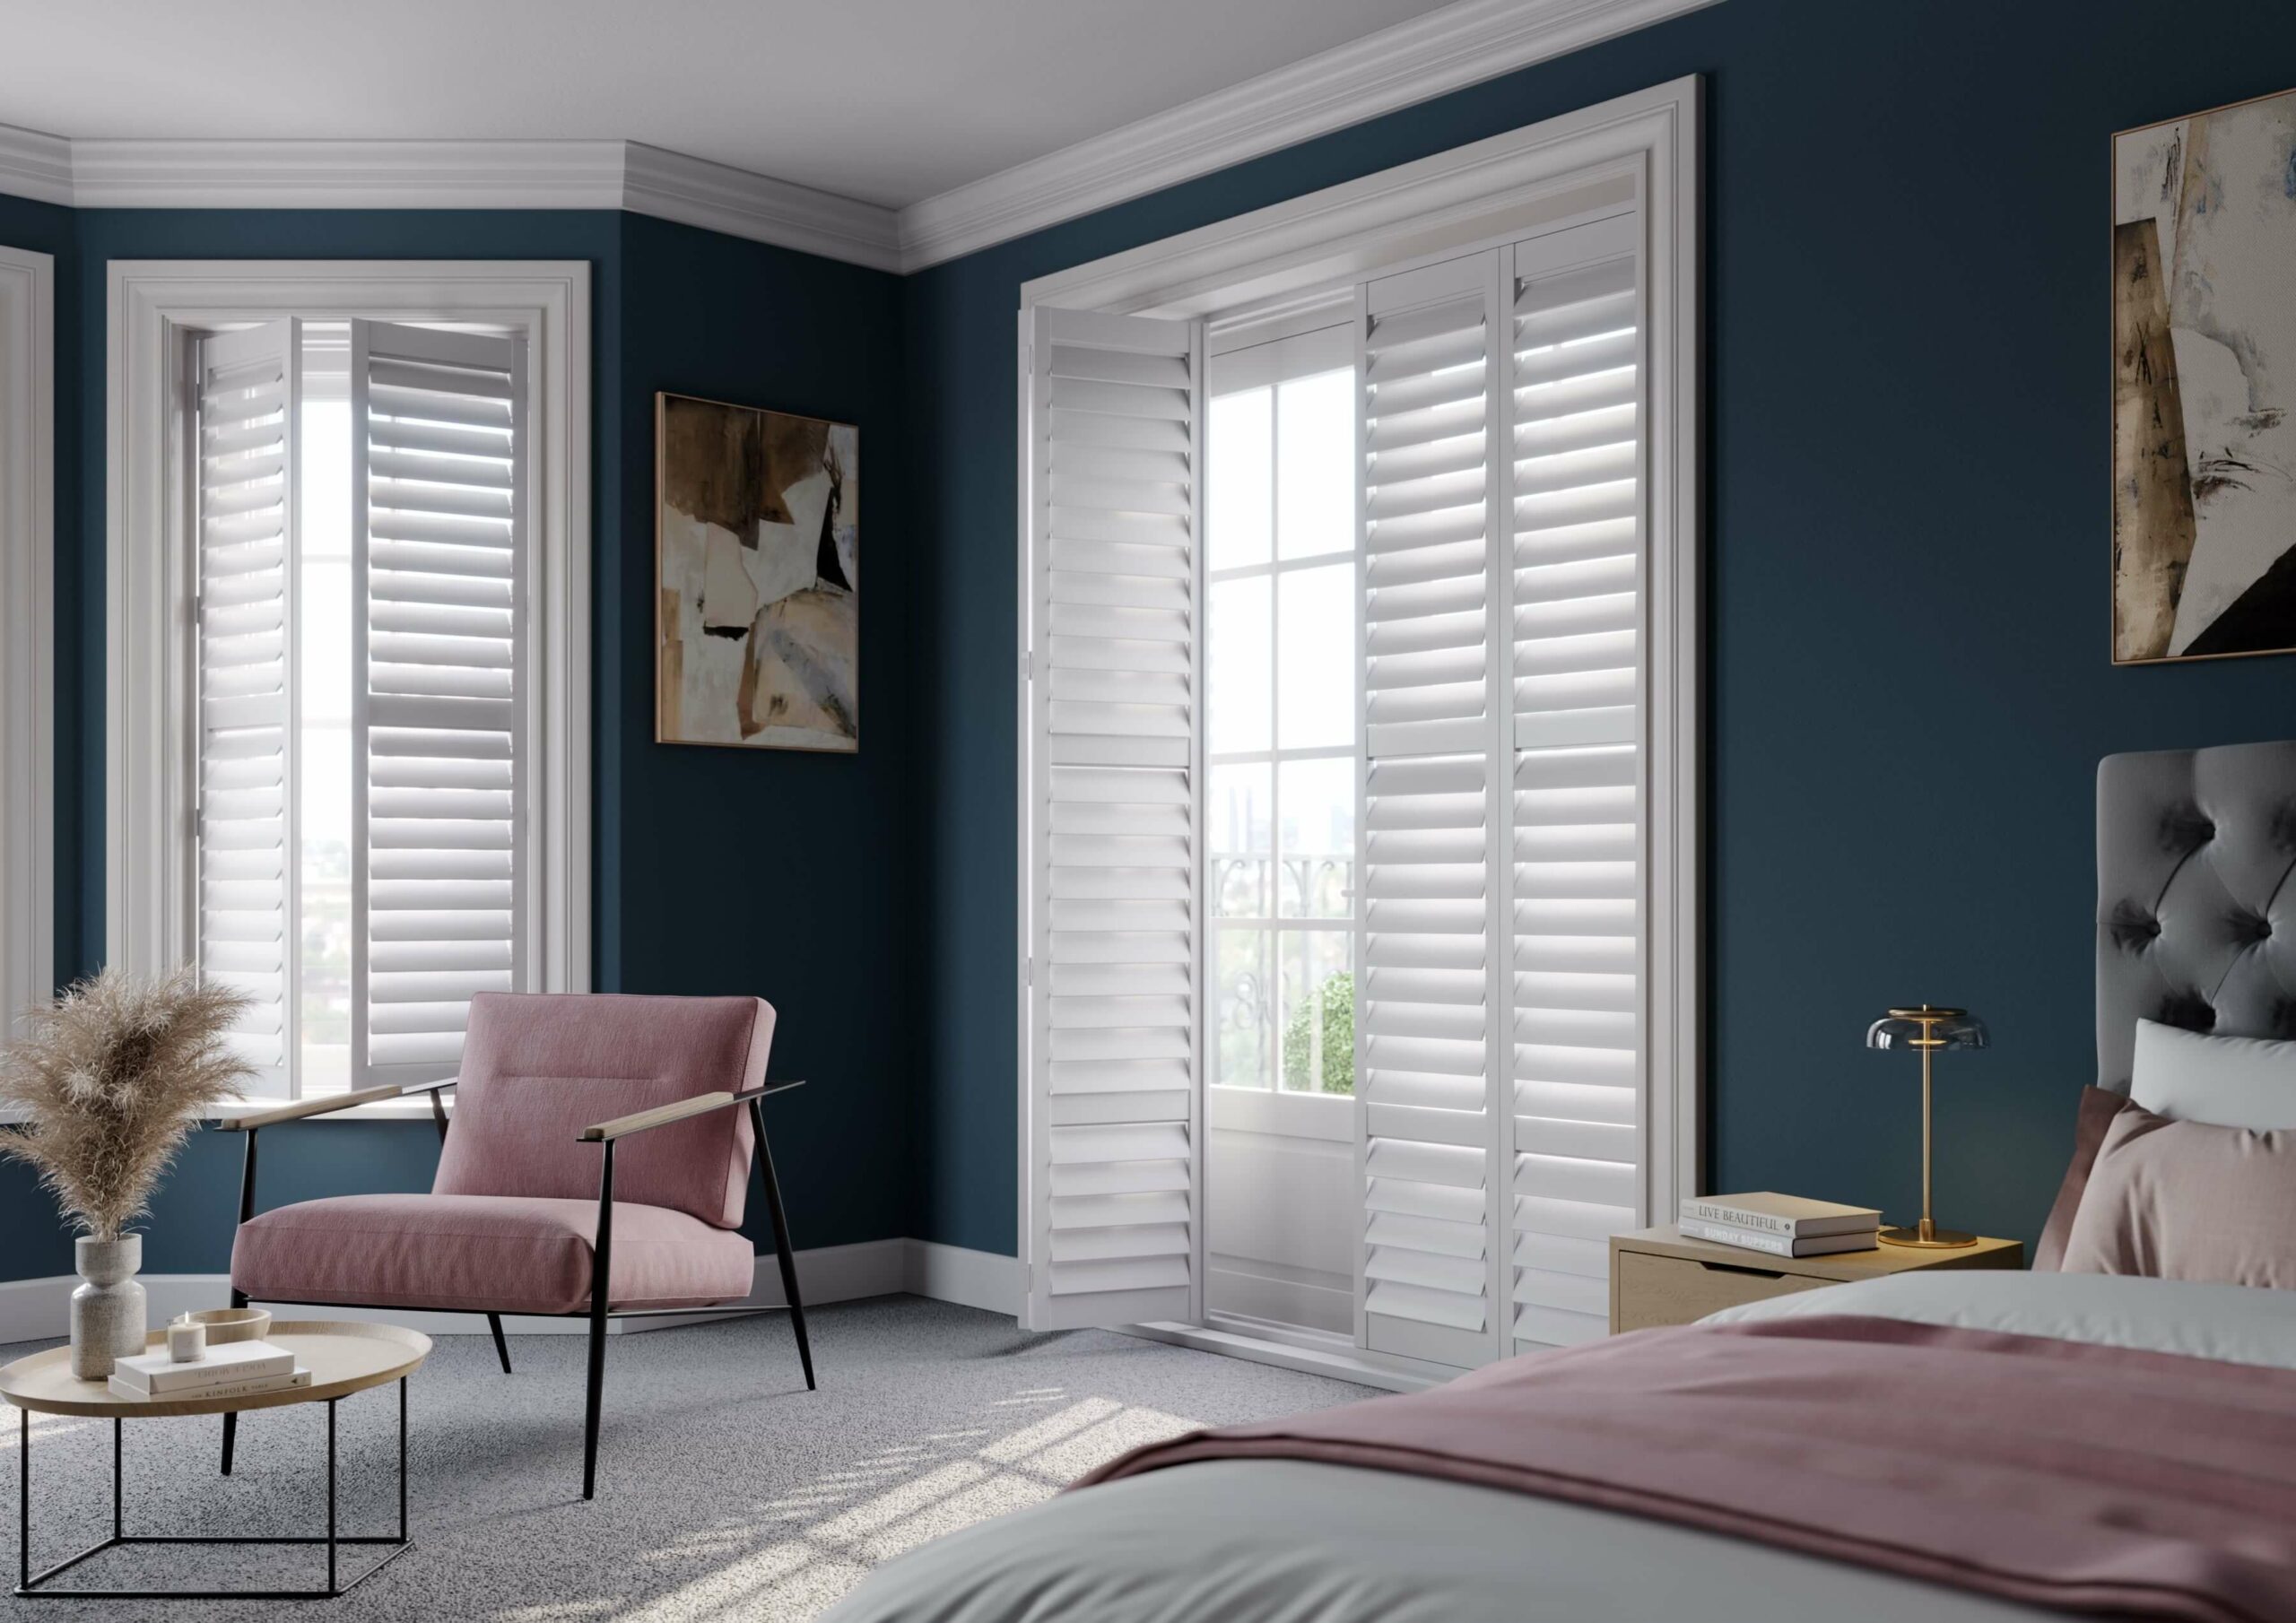 Bedroom with full height window shutters